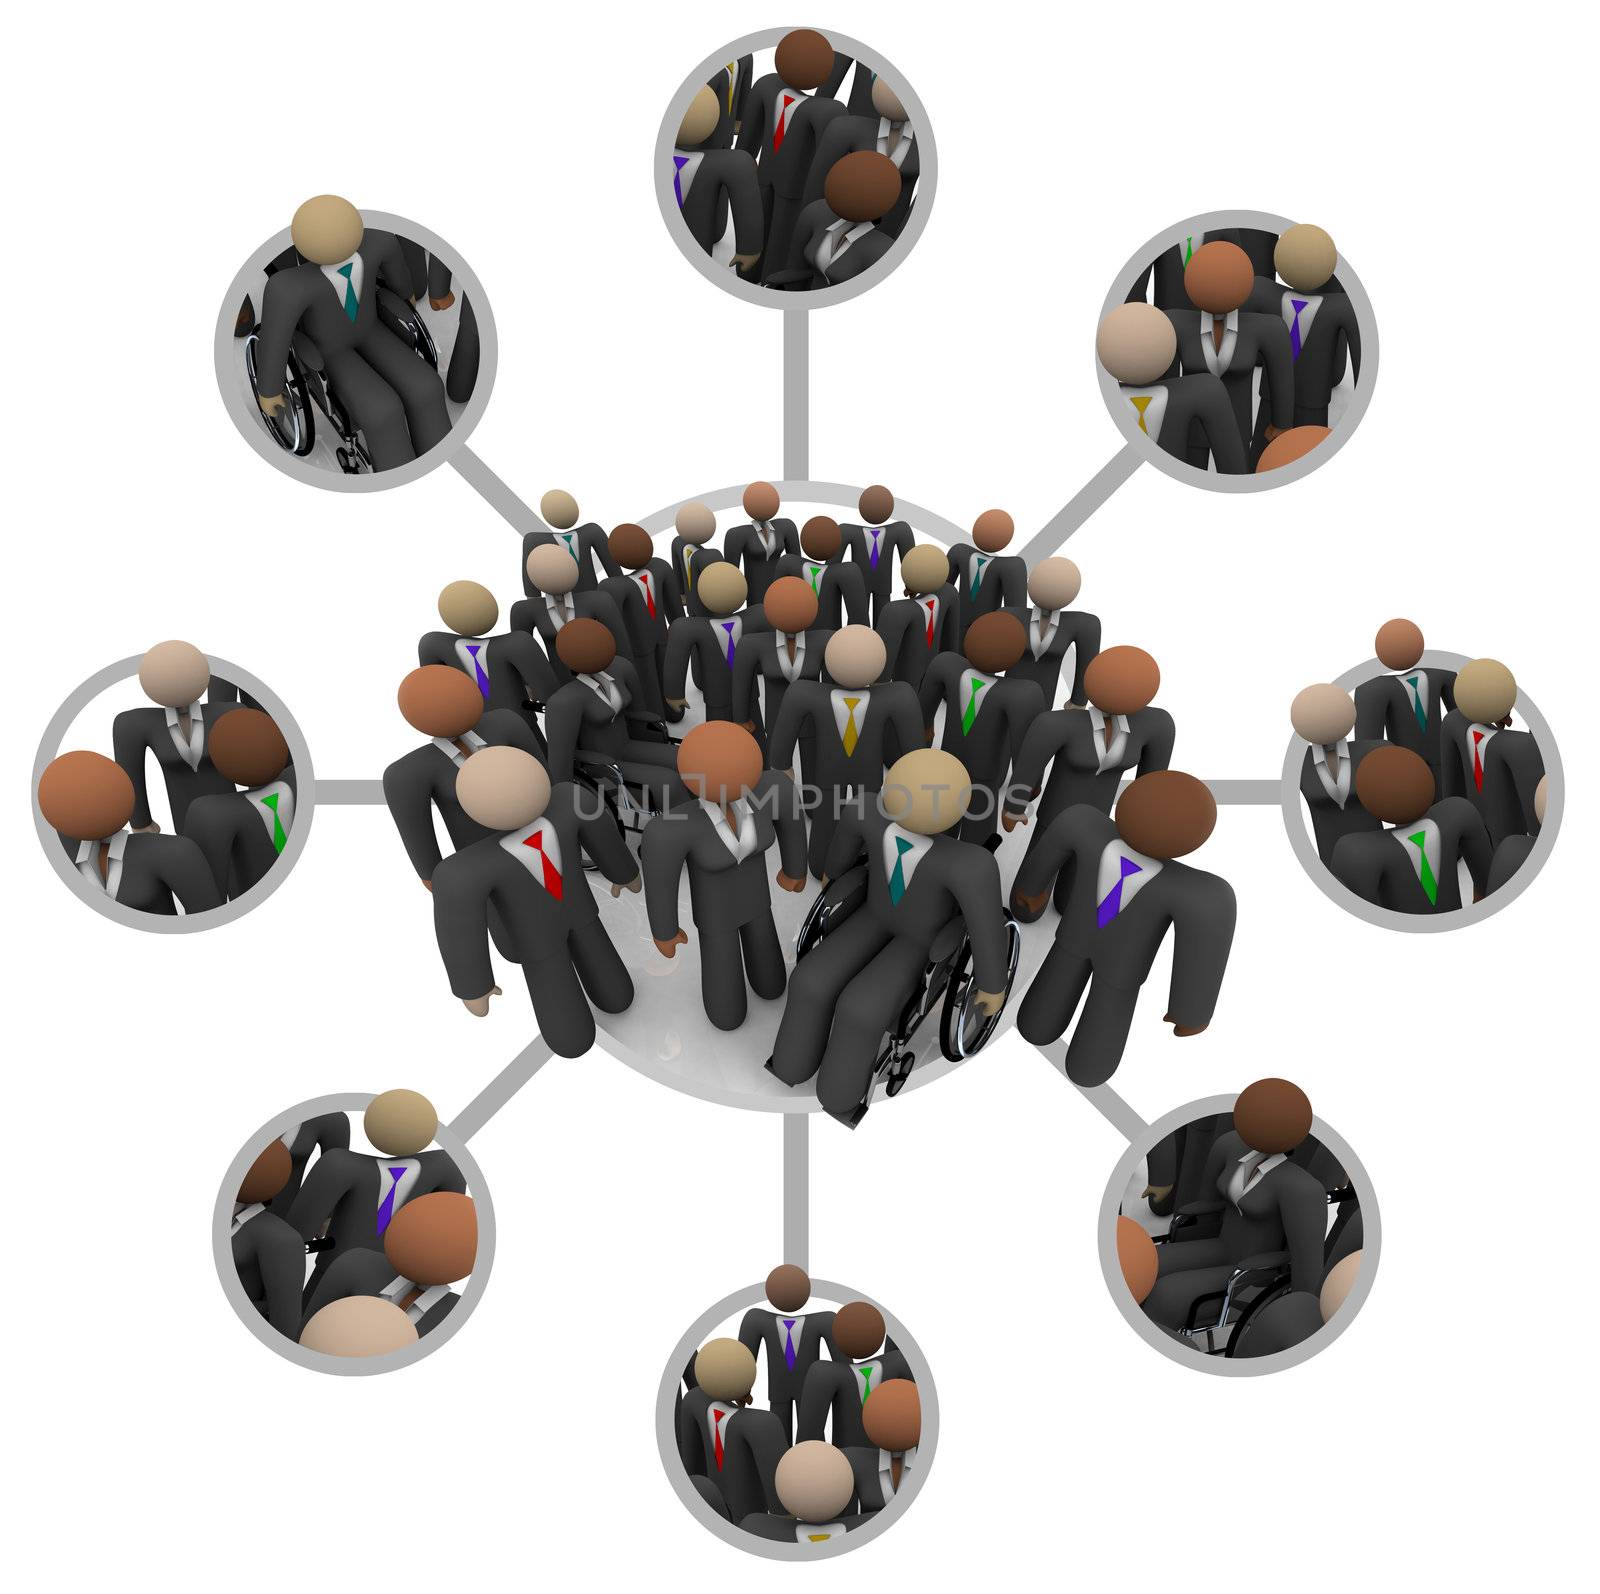 Diverse Workforce of Connected Professional People in Suits by iQoncept